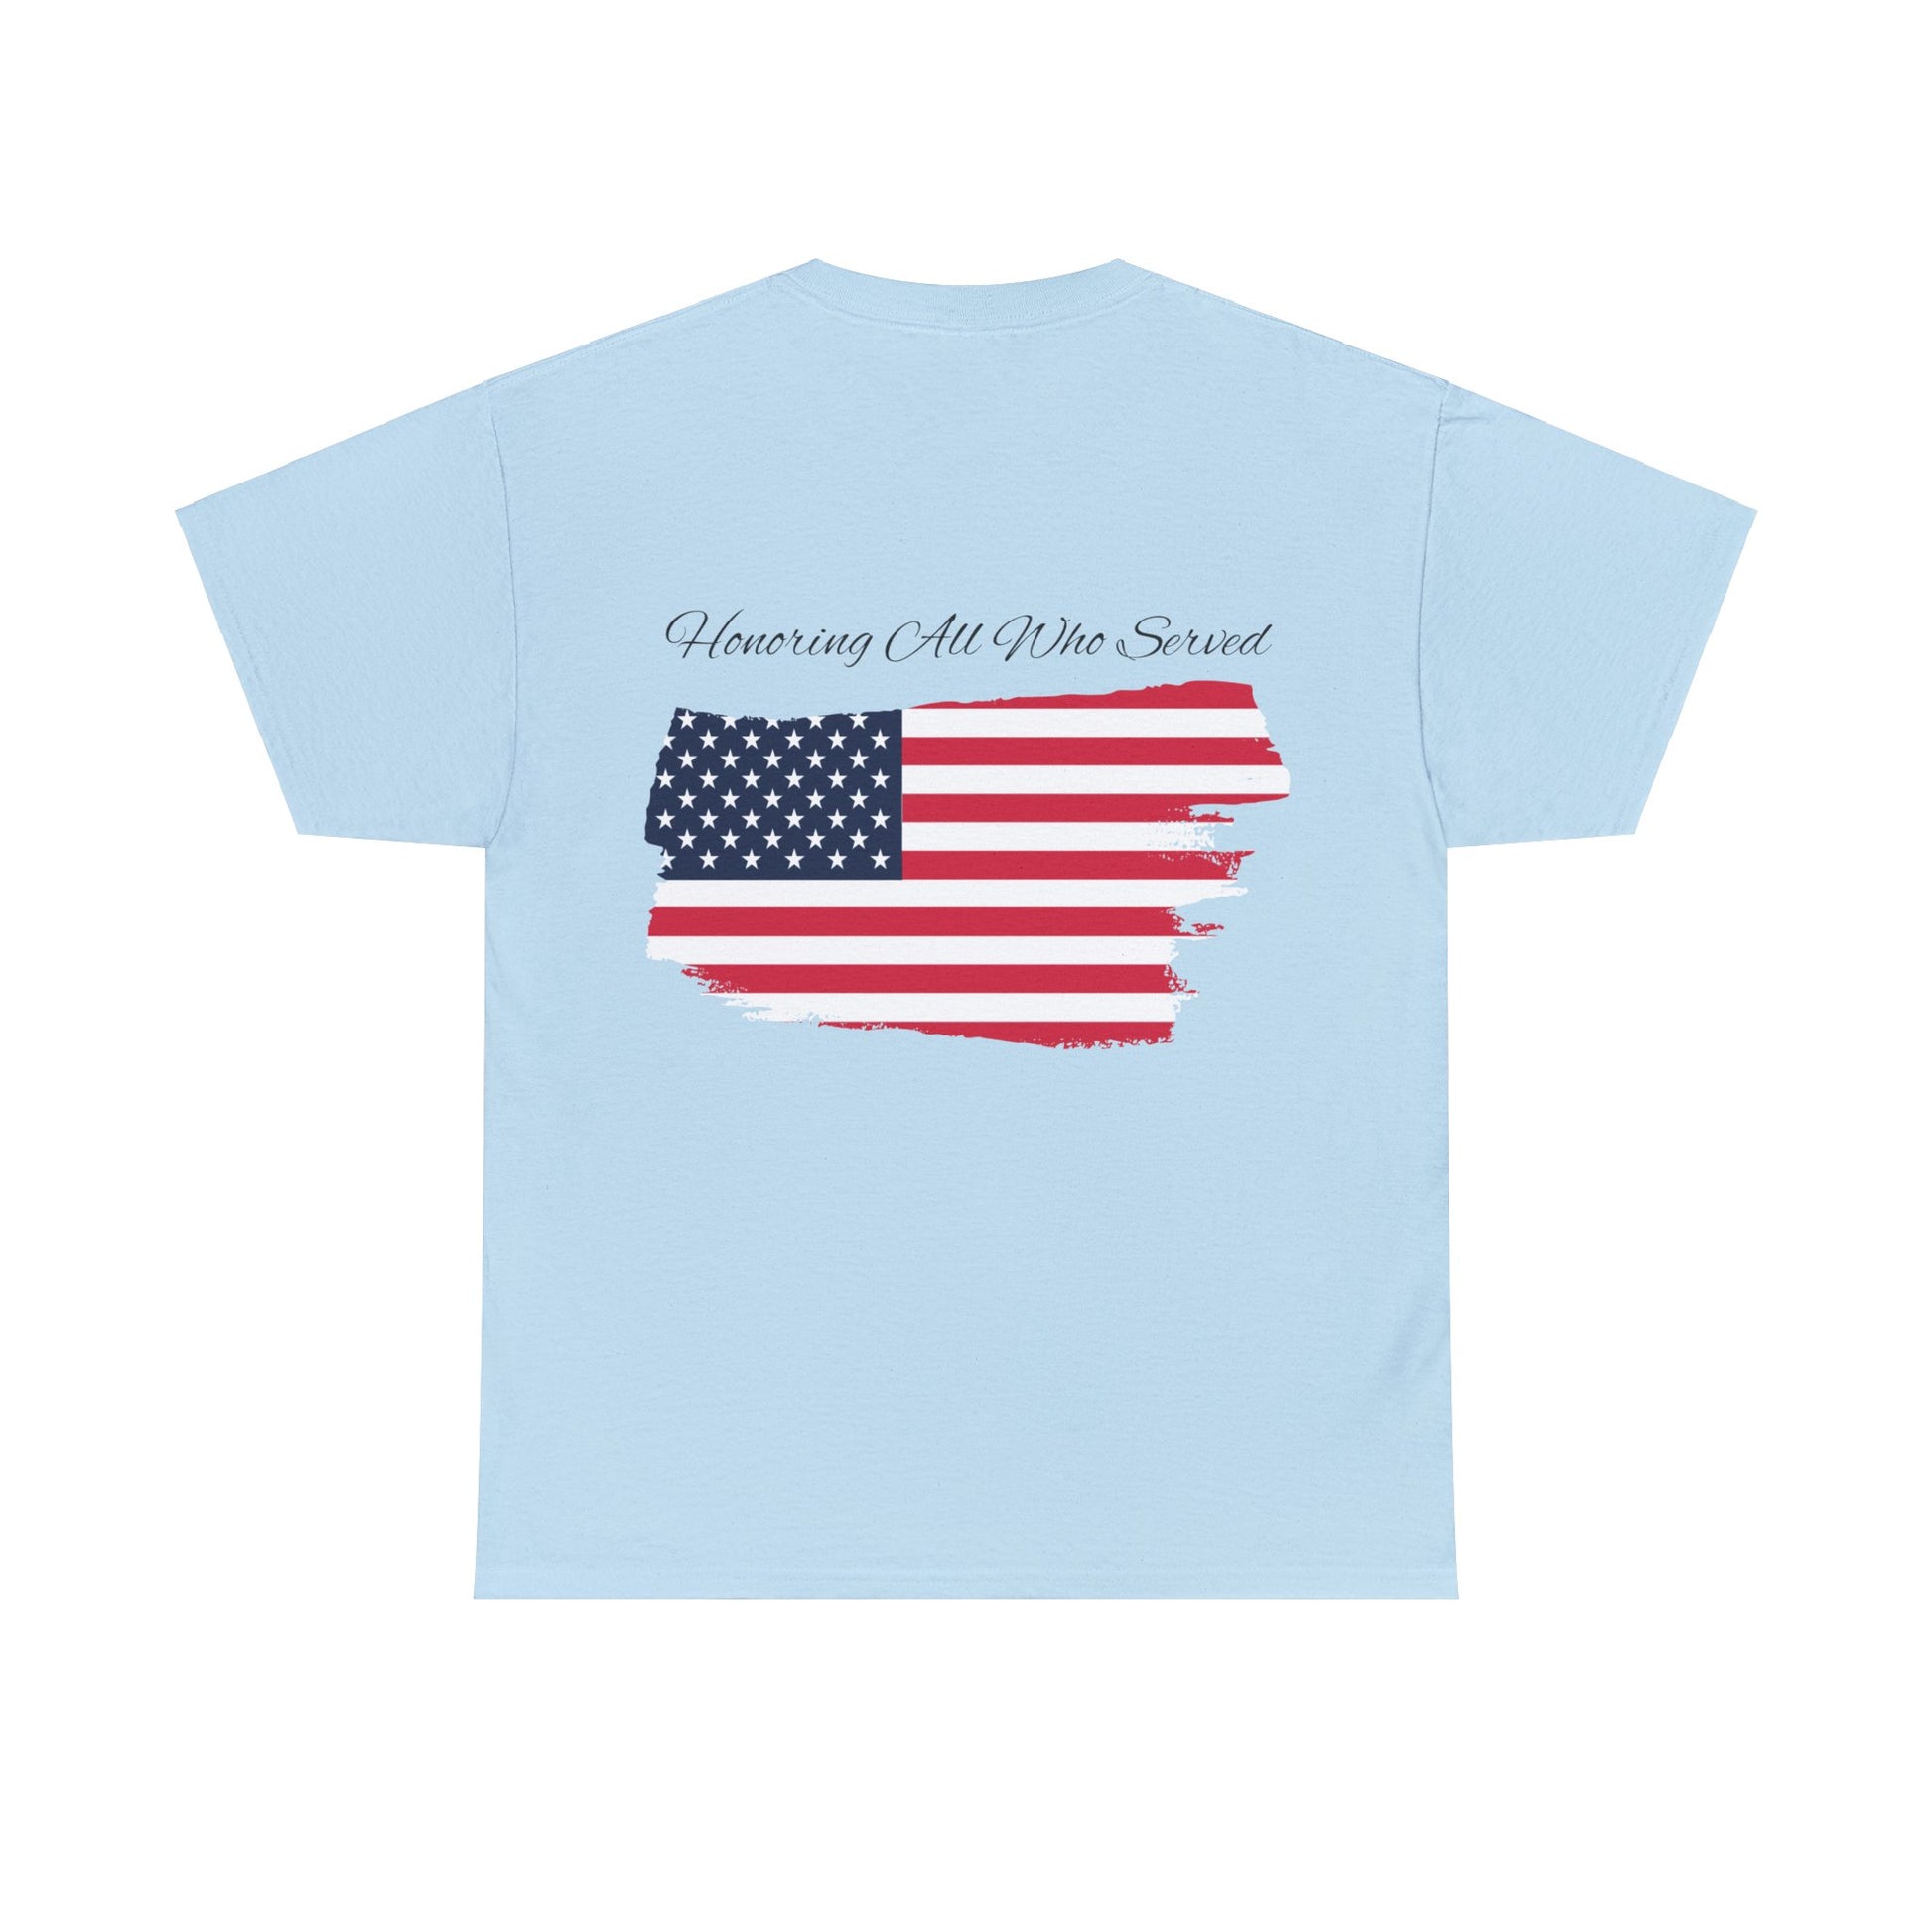 Unisex cotton tee with 'Honoring All Who Served' print for veterans tribute9